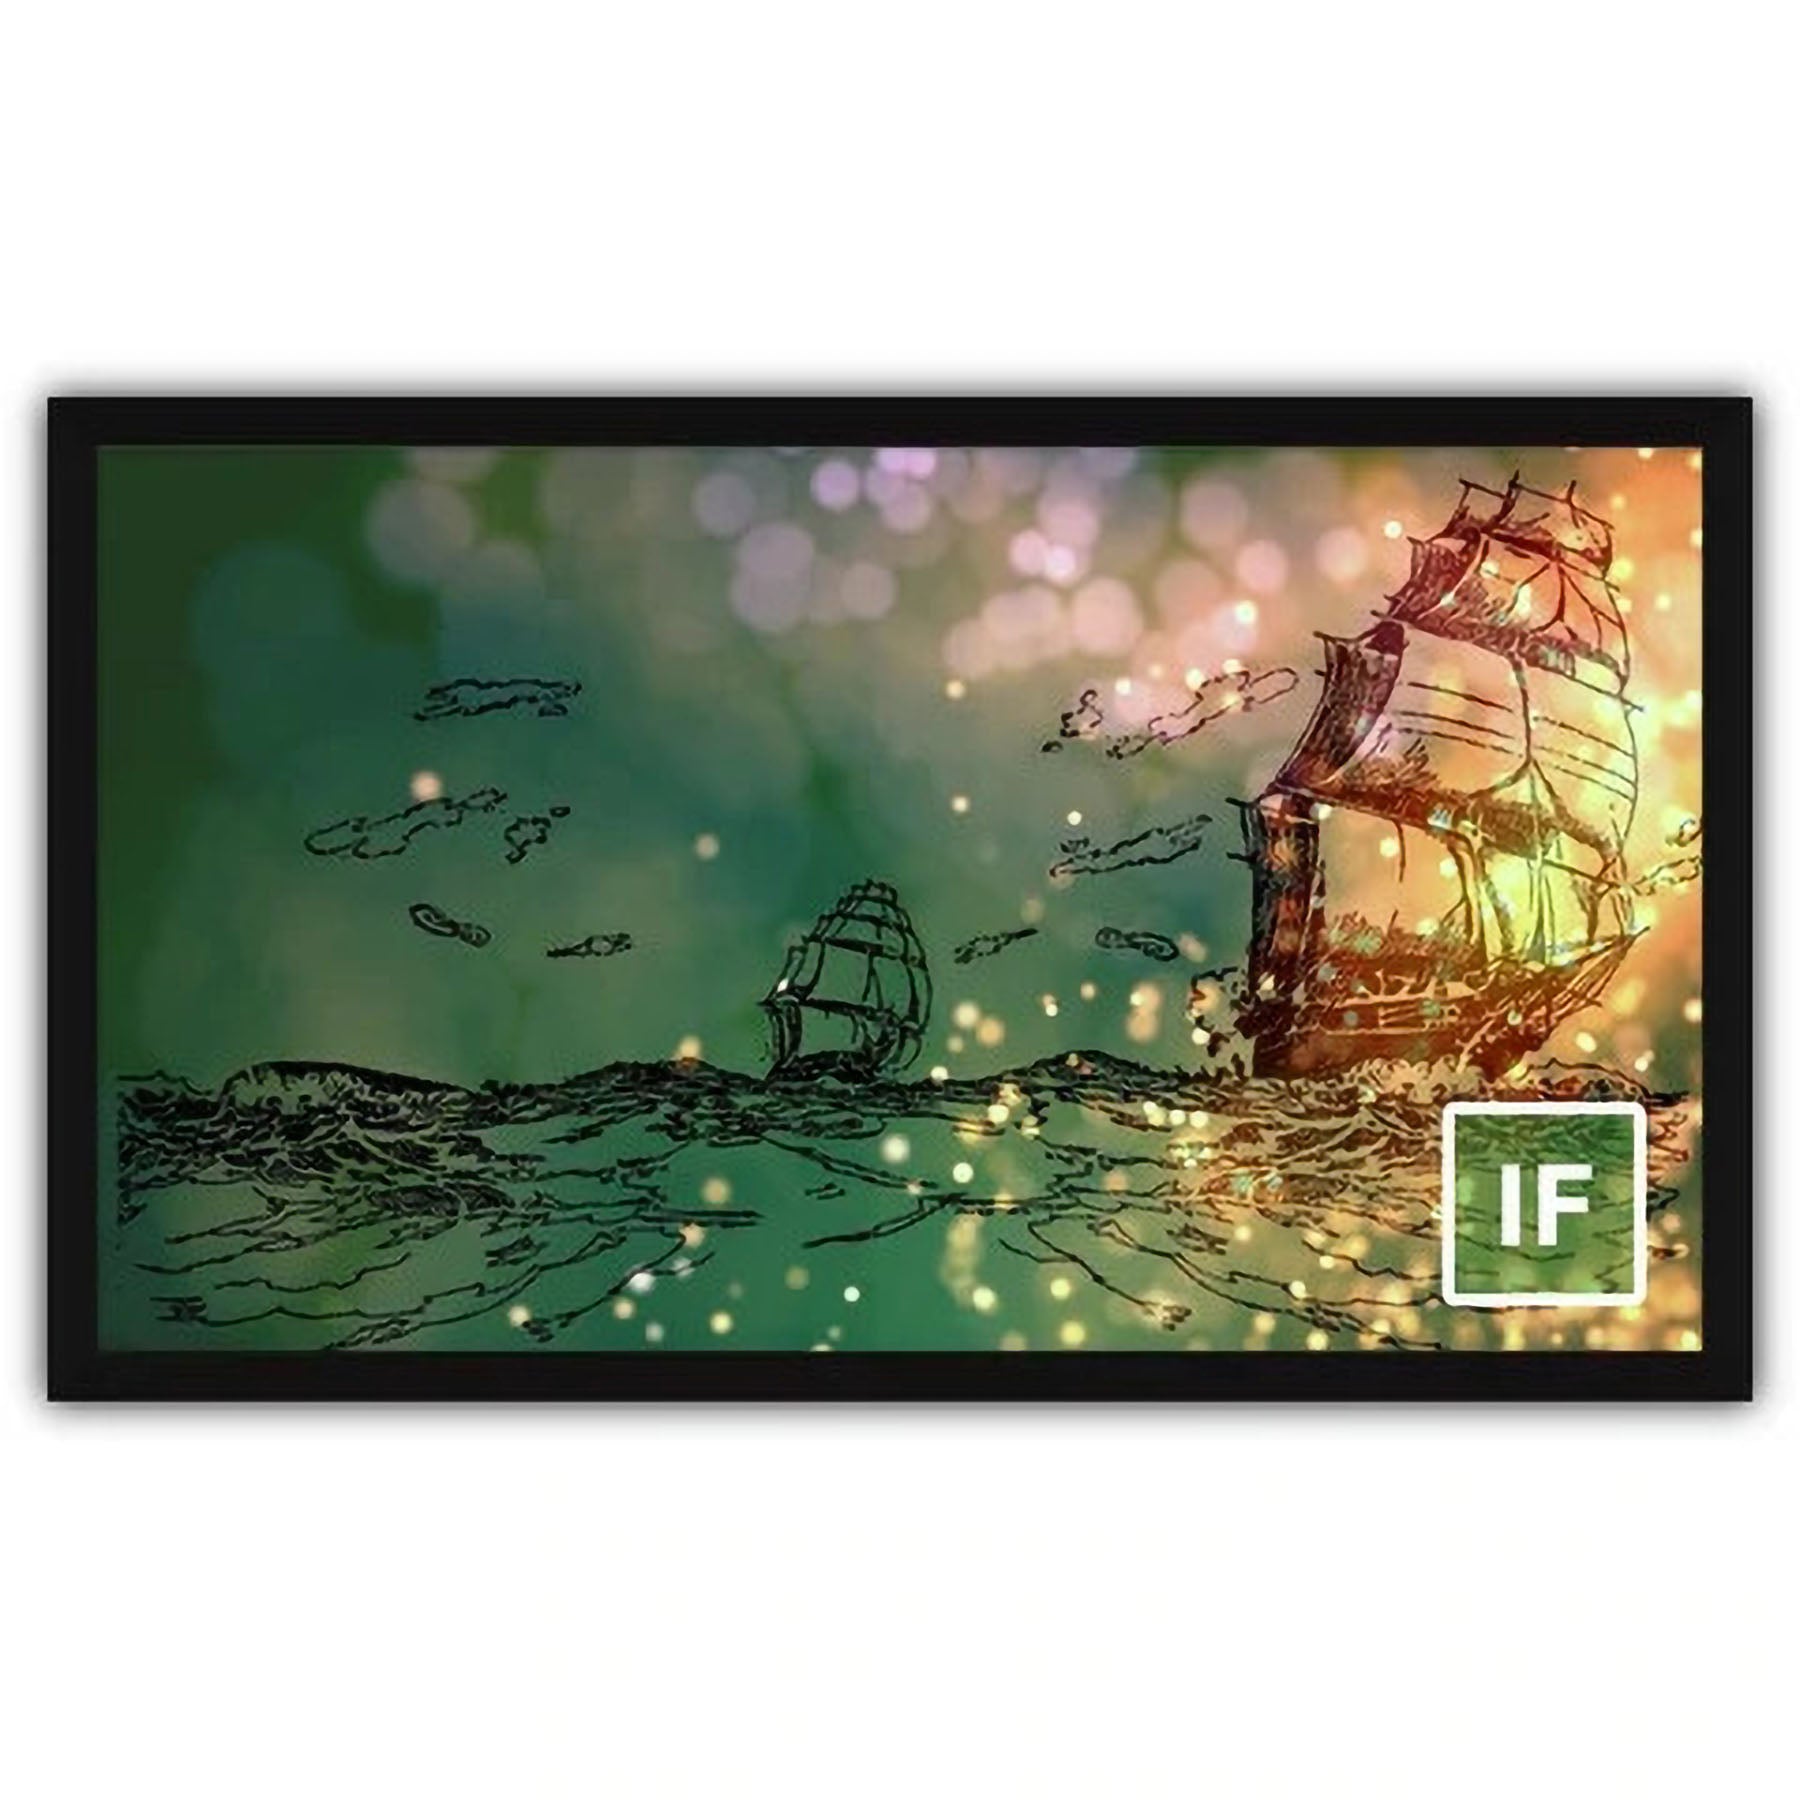 Severtson Screens Impression Series 16:9 150-inch Fixed Frame Projection Screen